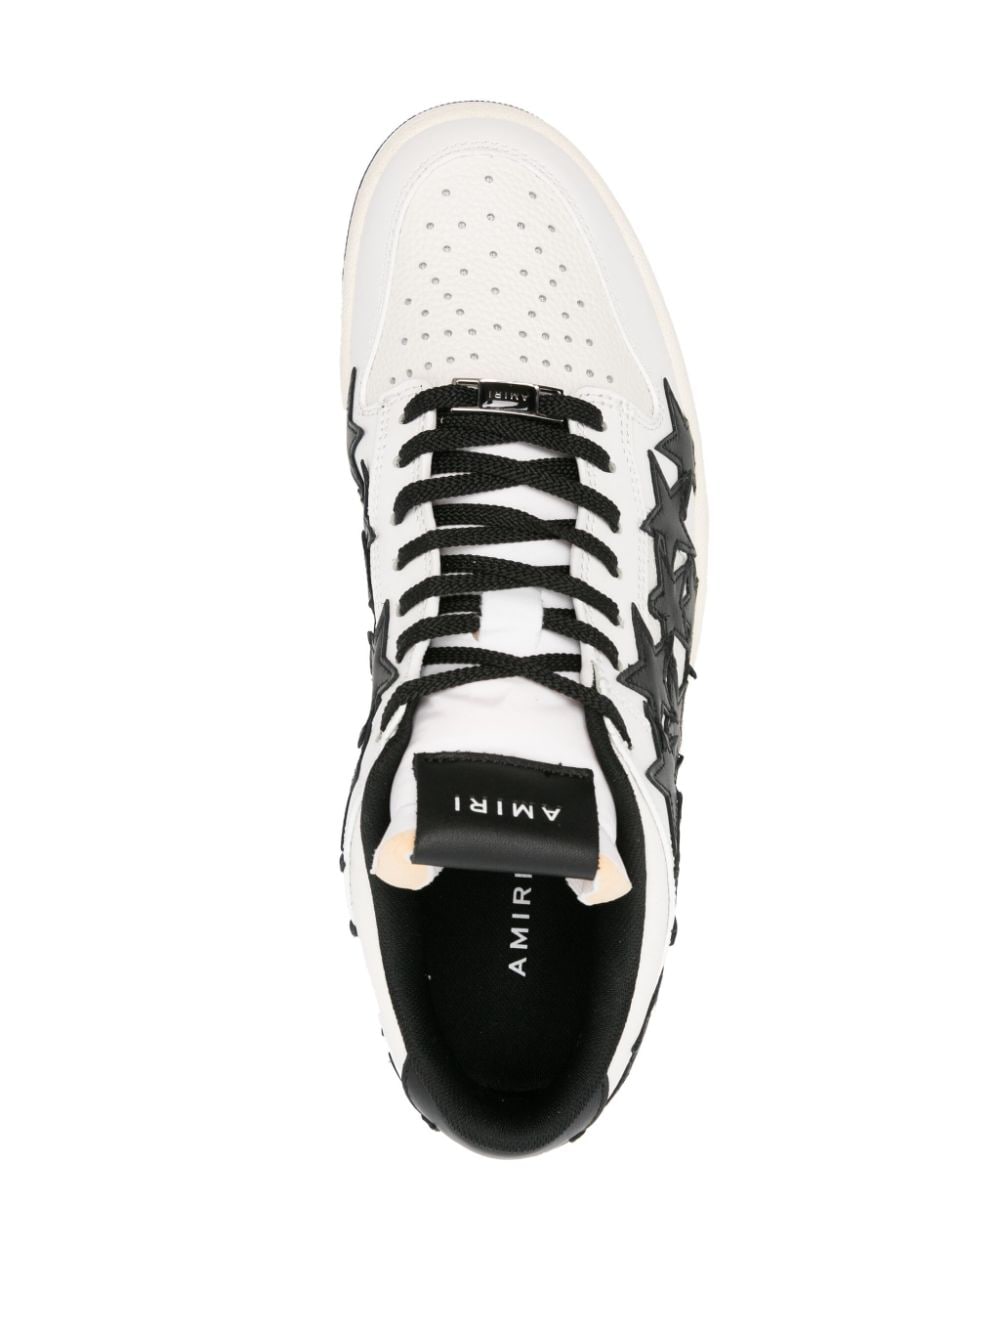 Stars Court leather sneakers